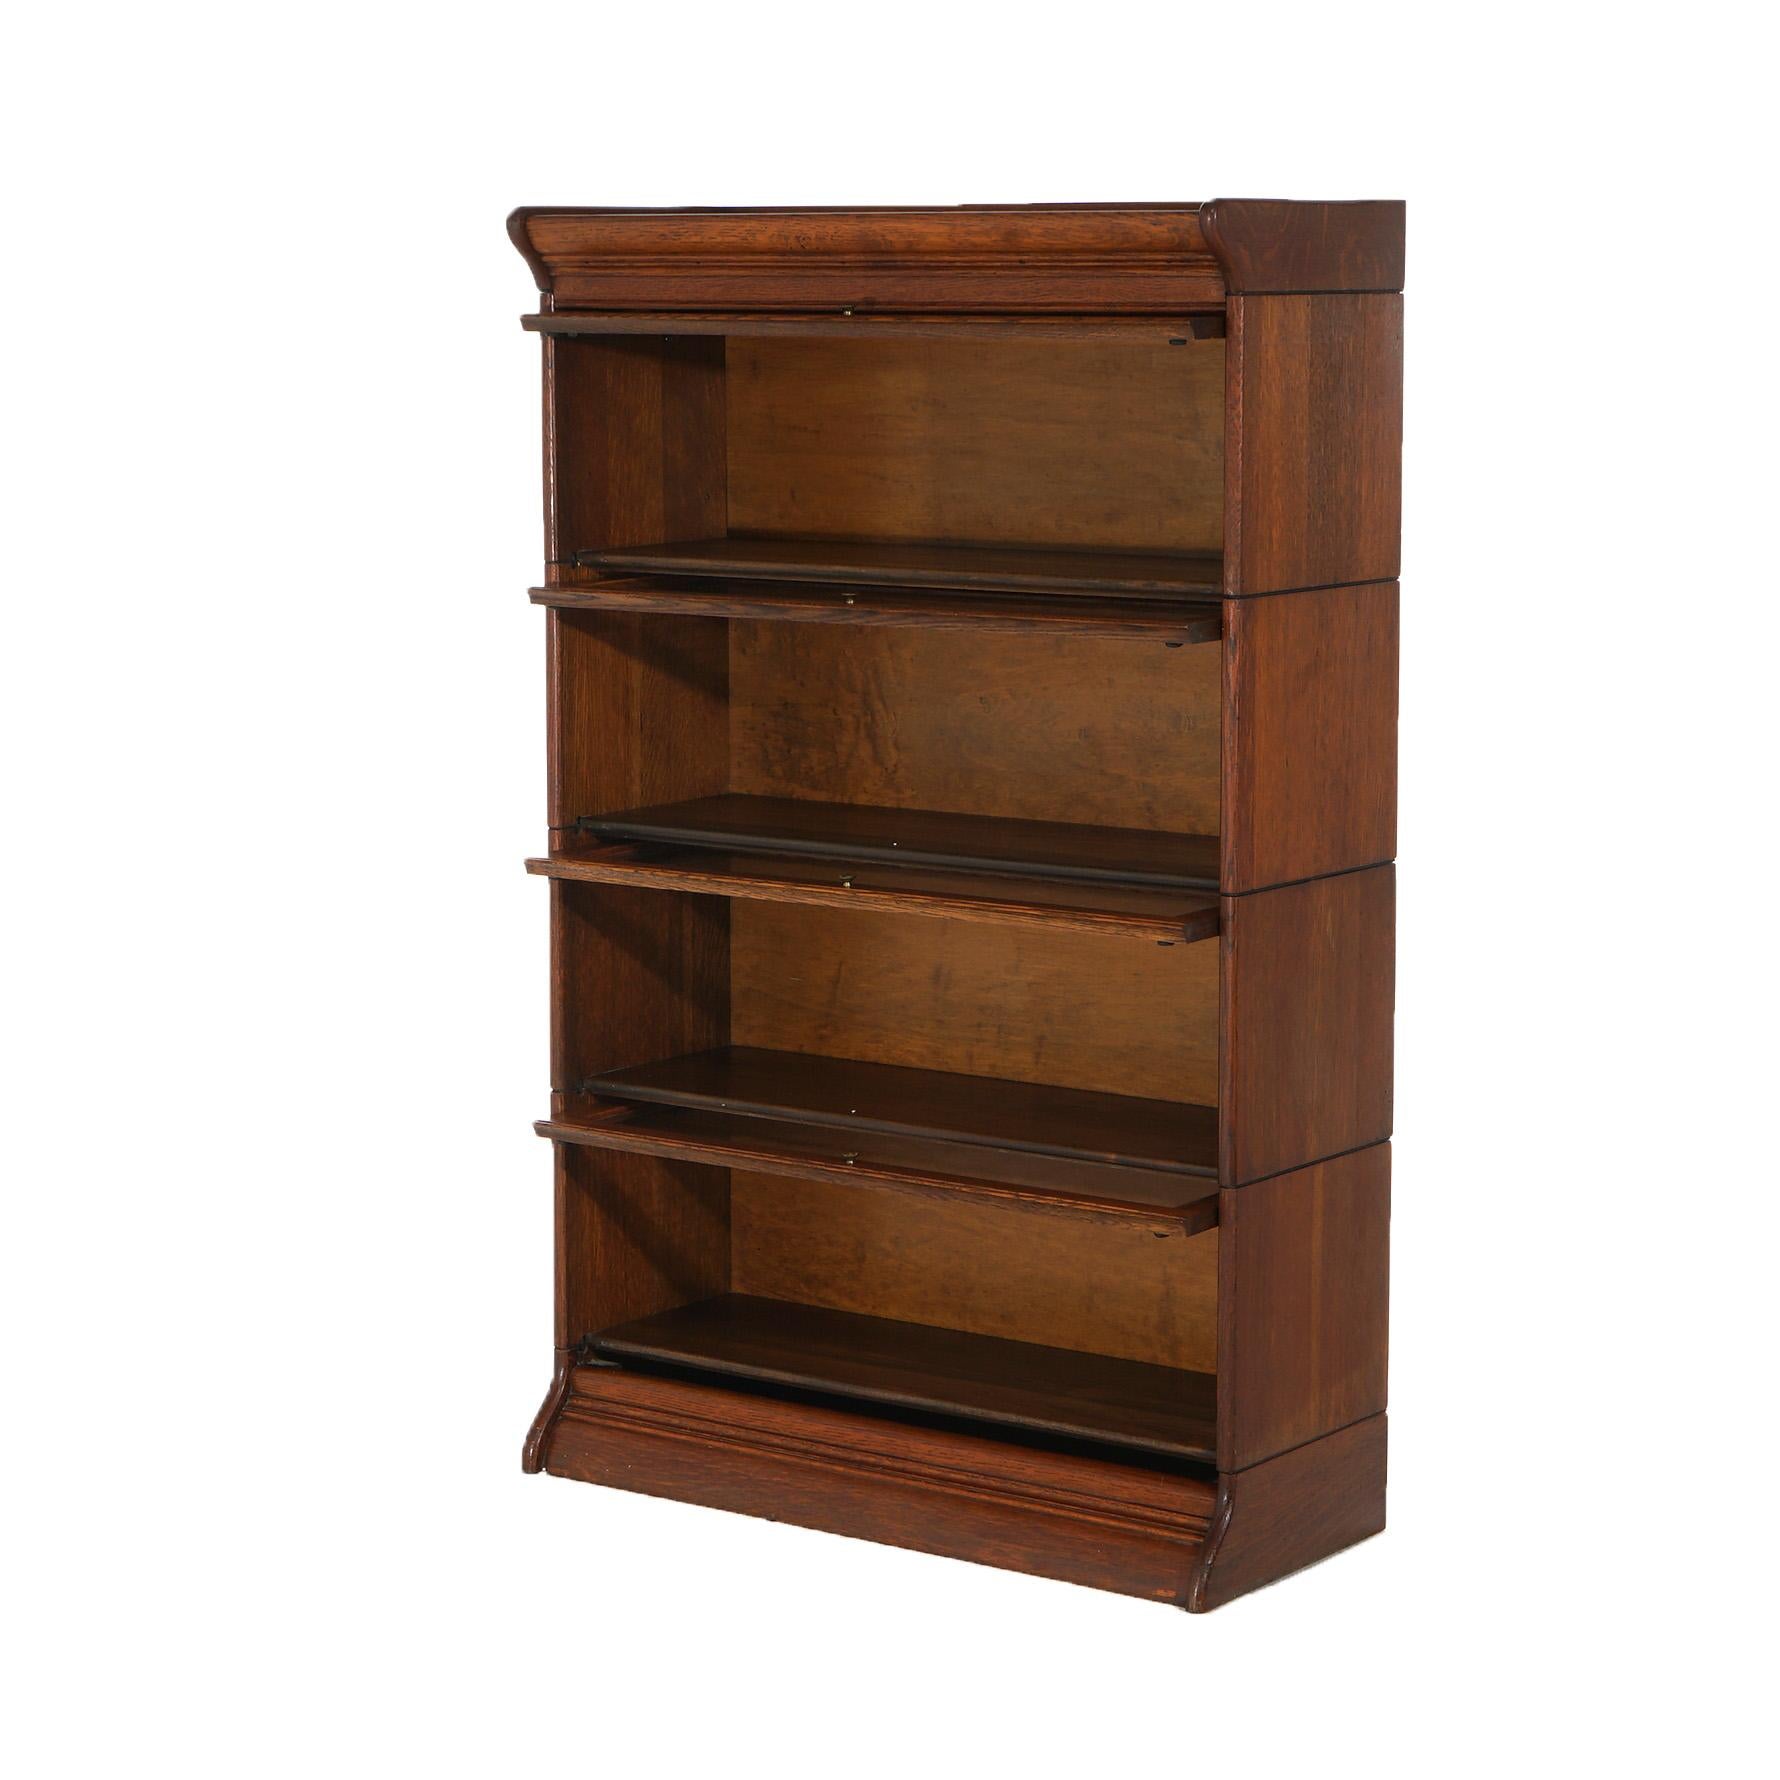 ***Ask About Reduced In-House Delivery Rates - Reliable Professional Service & Fully Insured***

Antique Arts & Crafts Four-Stack Oak Barrister Bookcase with Pull-Out Glass Doors over Ogee Base, C1920

Measures- 53.75''H x 34''W x 14.5''D; Shelves: